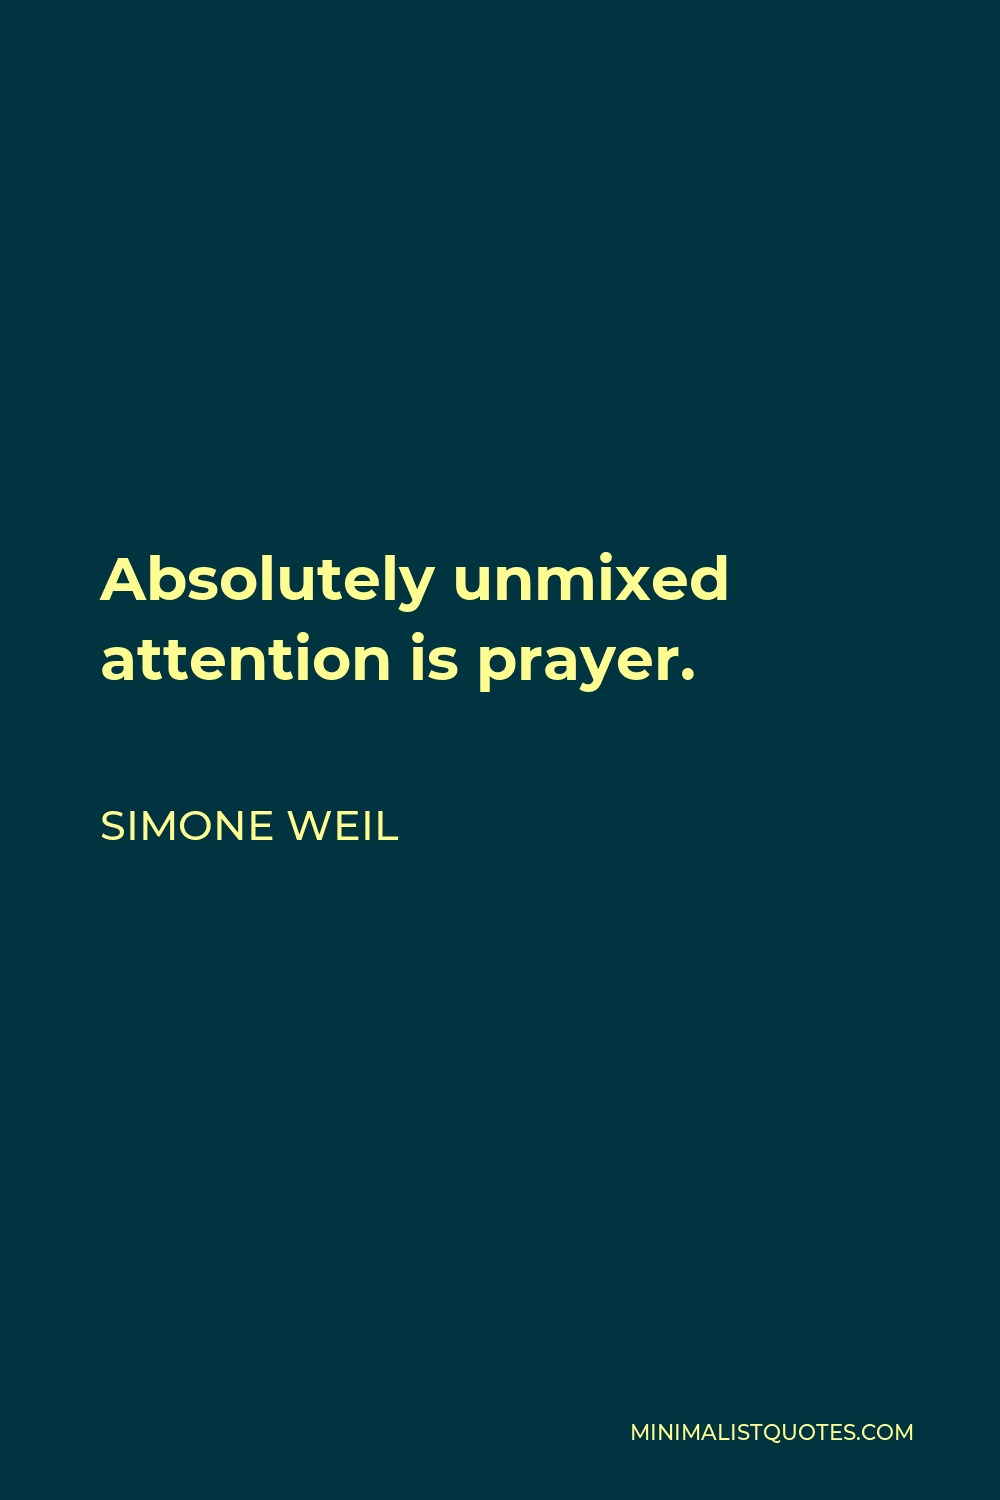 Simone Weil quote: Expectant waiting is the foundation of the spiritual  life.